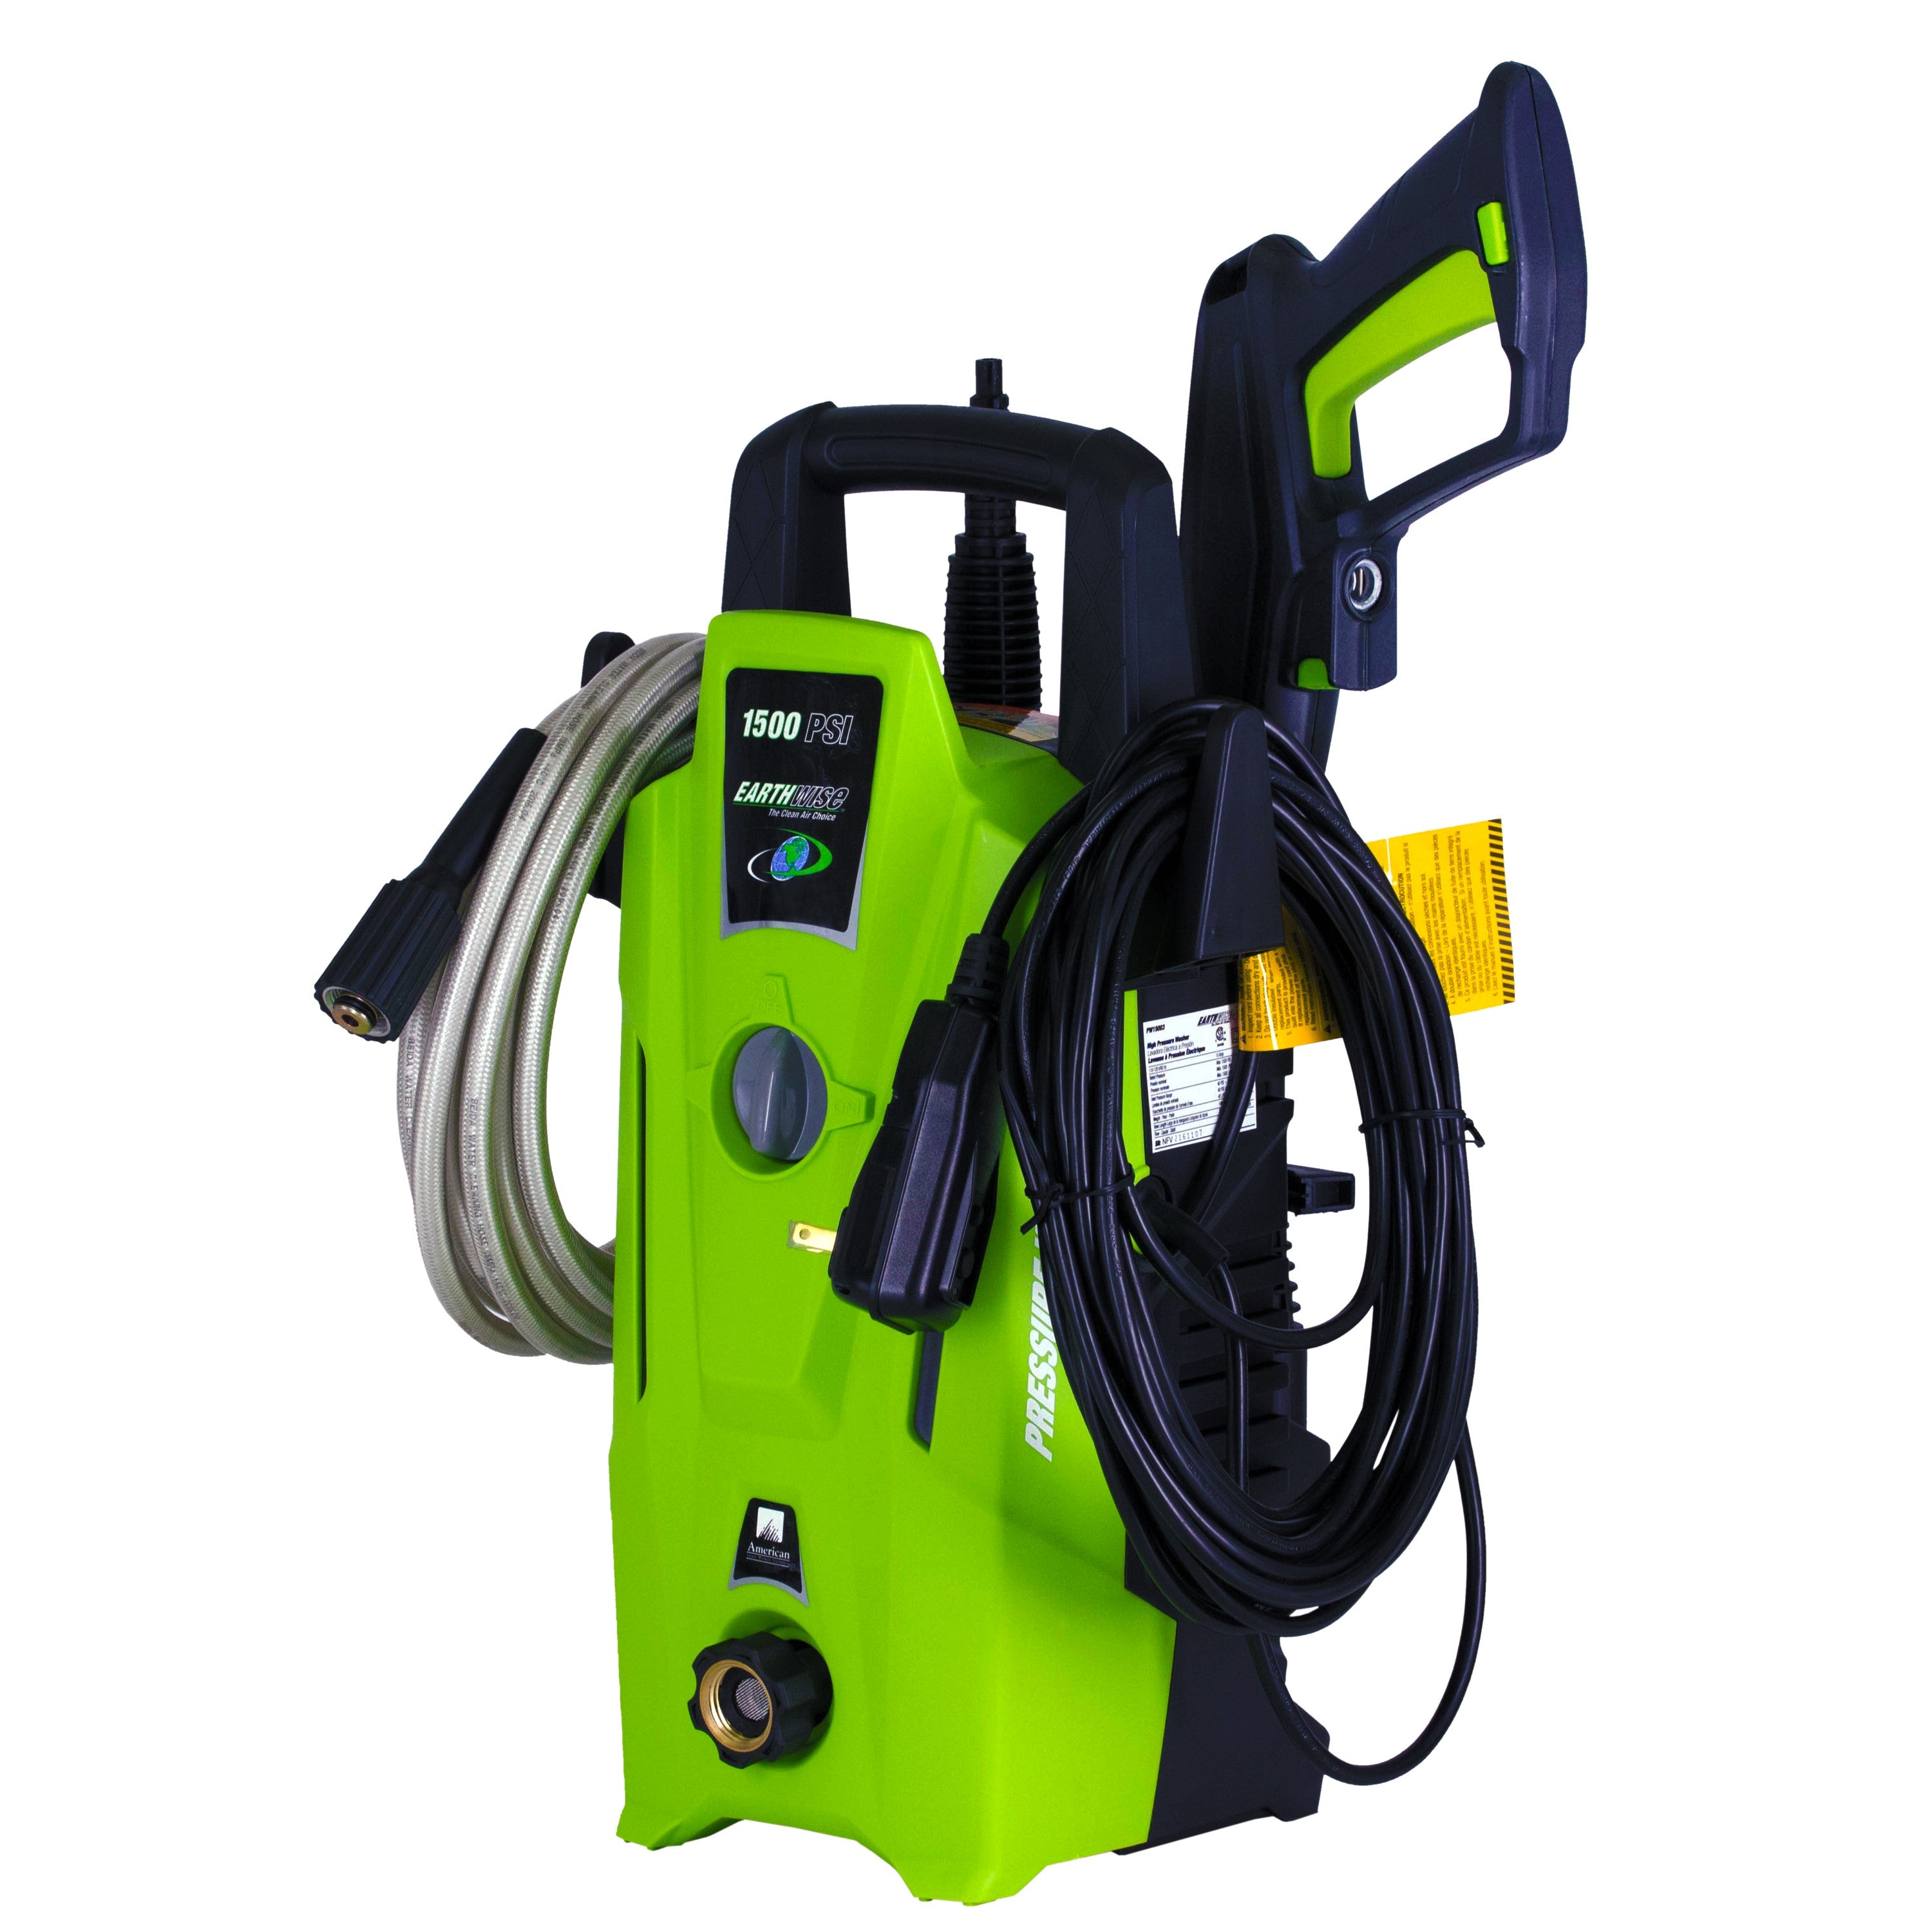 Earthwise Power Tools by ALM 1500 PSI 10-Amp 120V Corded Pressure Washer